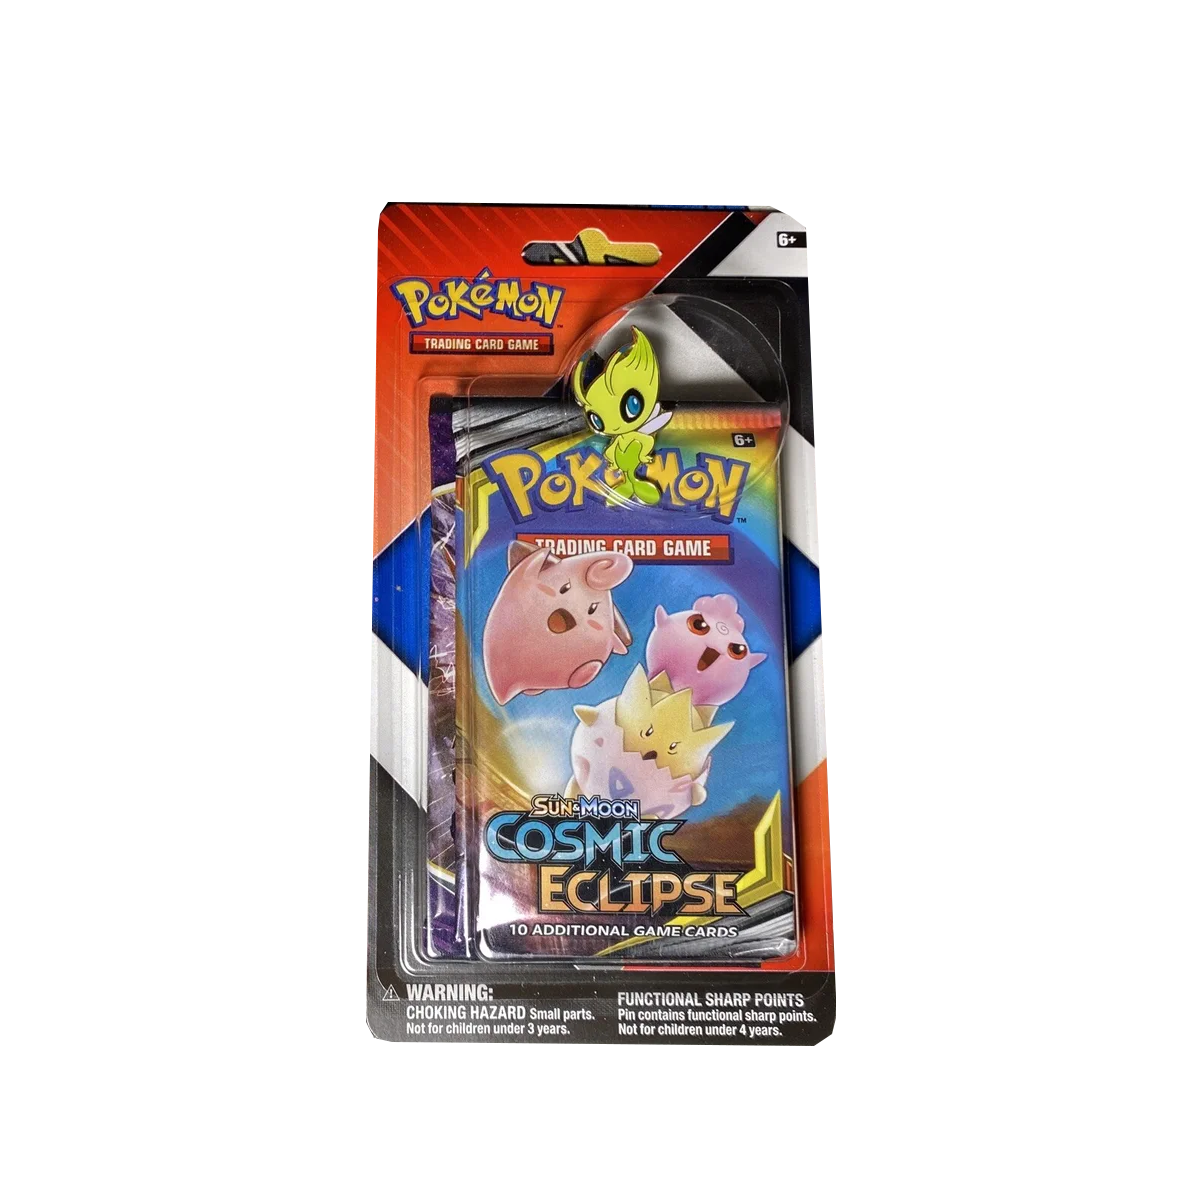 Pokémon - Sword & Shield - Cosmic Eclipse / Chilling Reign - Blister Pack - Styles May Vary